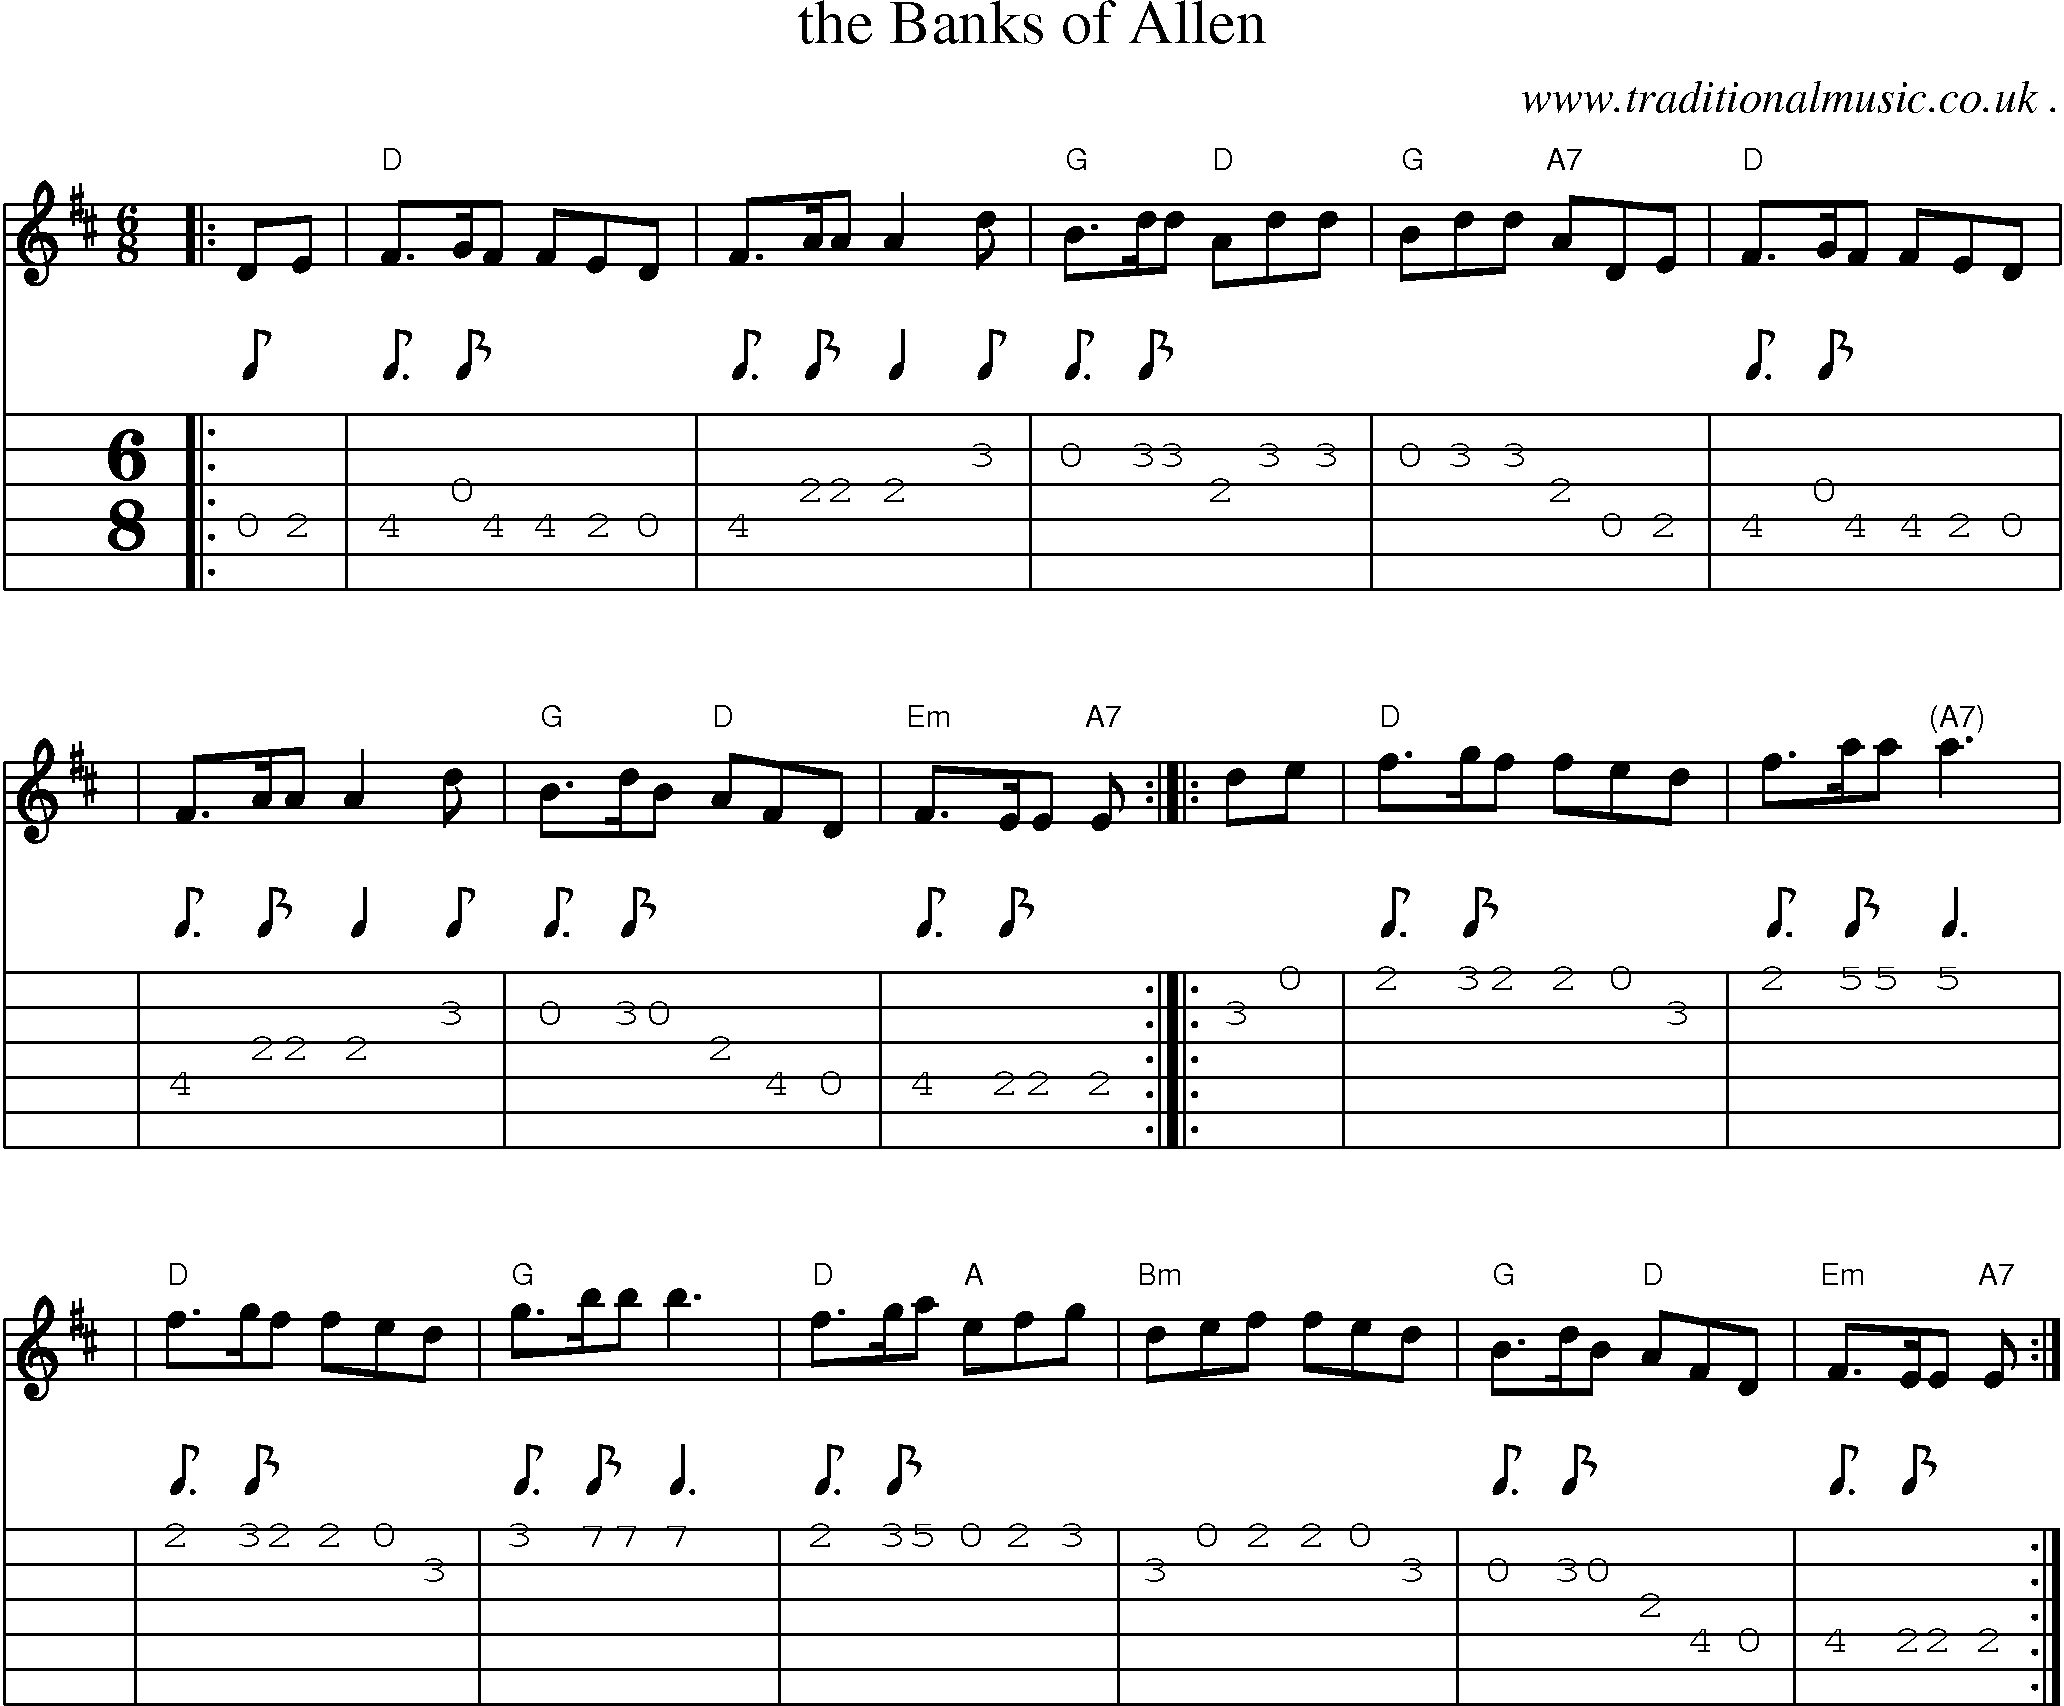 Sheet-music  score, Chords and Guitar Tabs for The Banks Of Allen